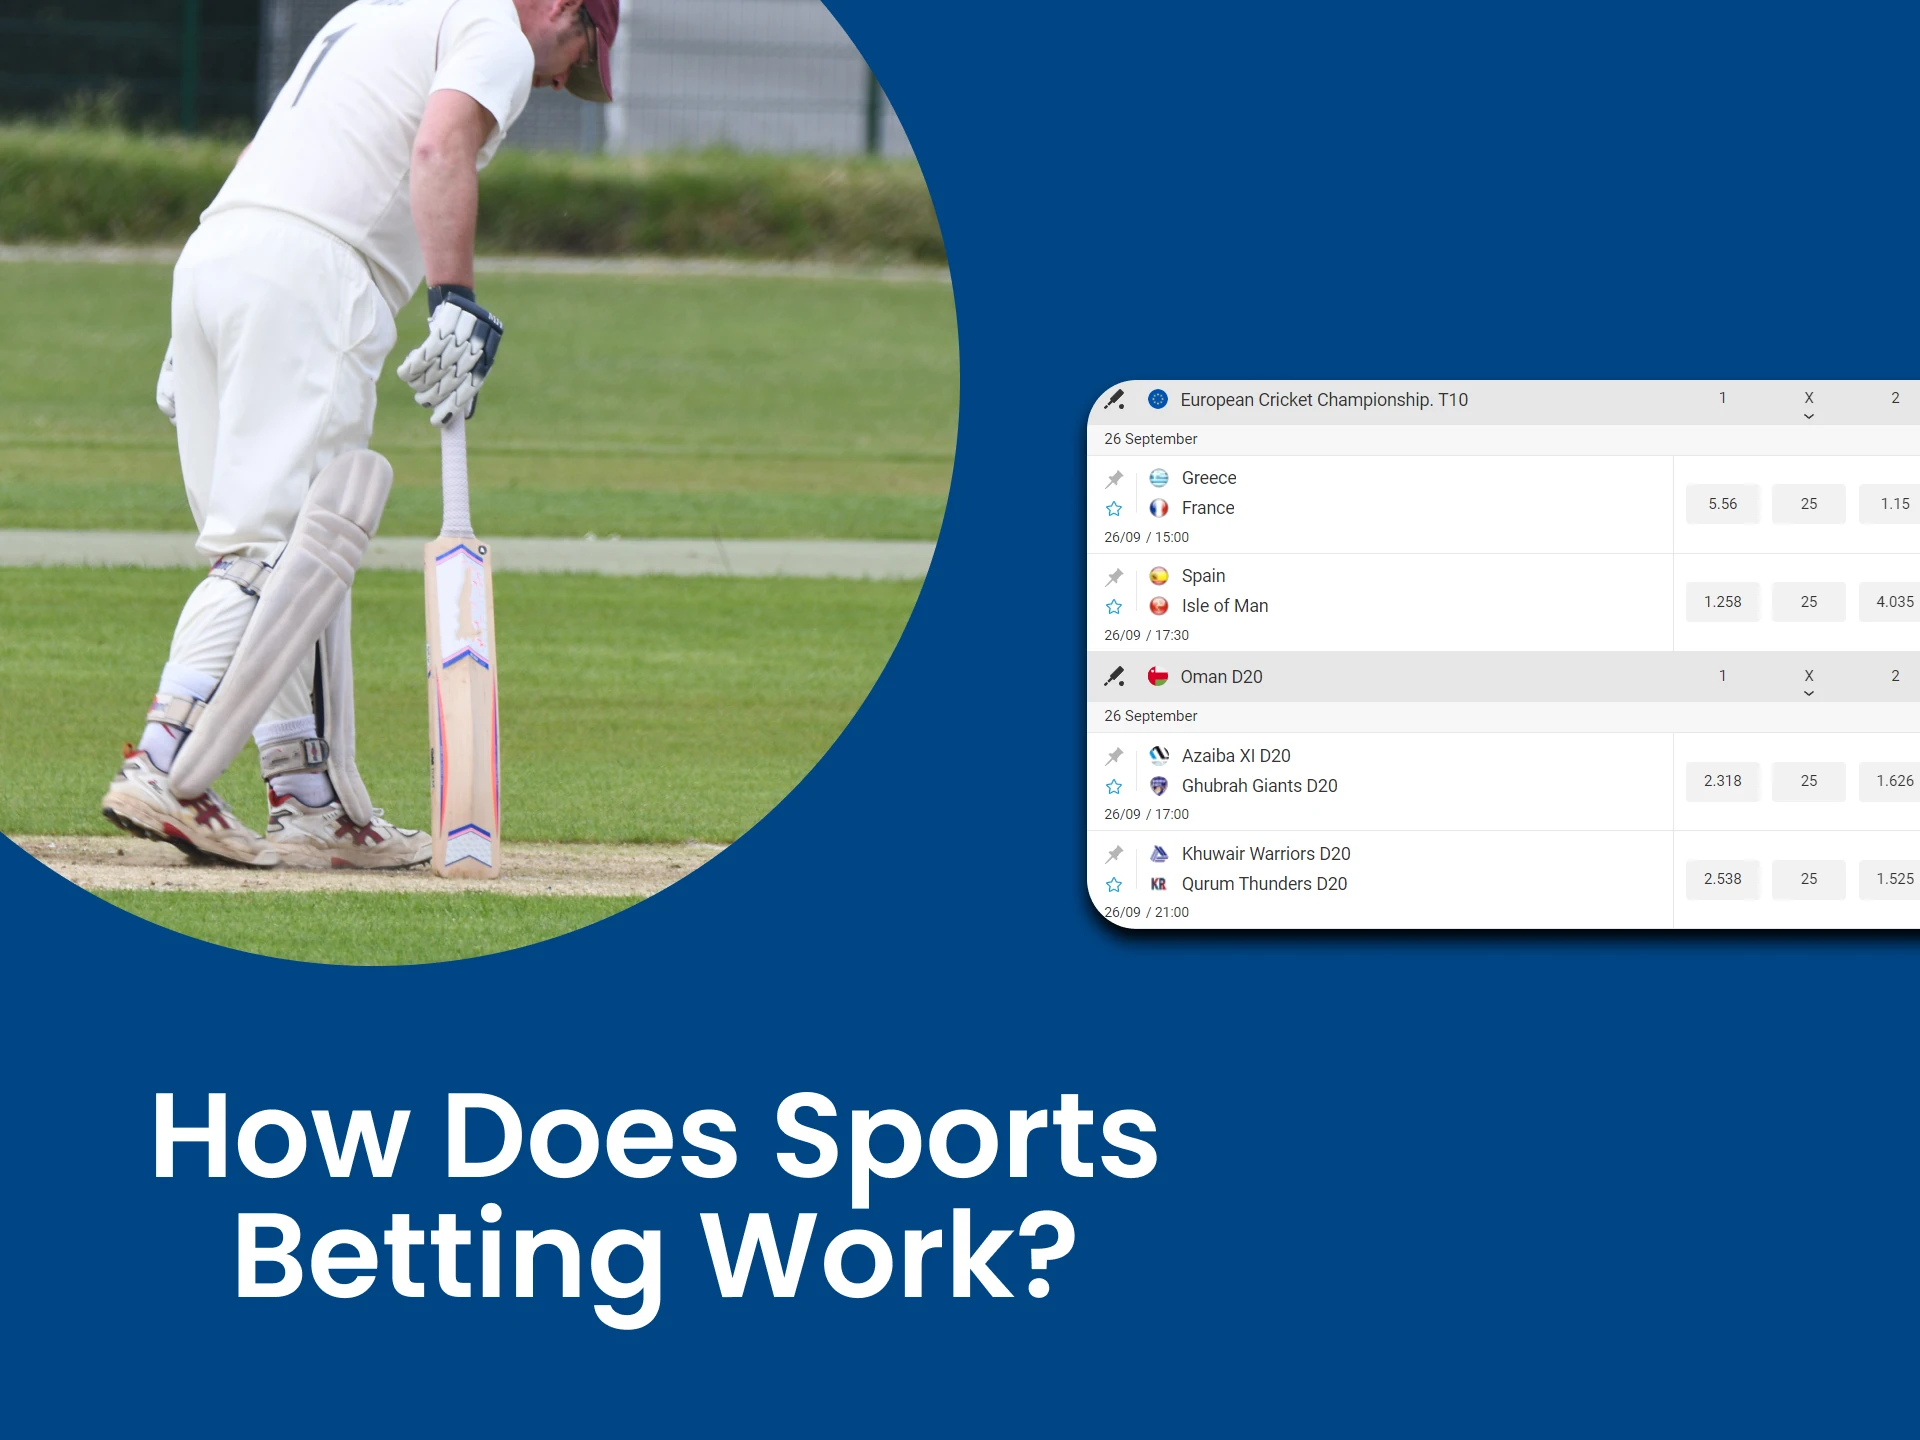 We will tell you how sports betting works.